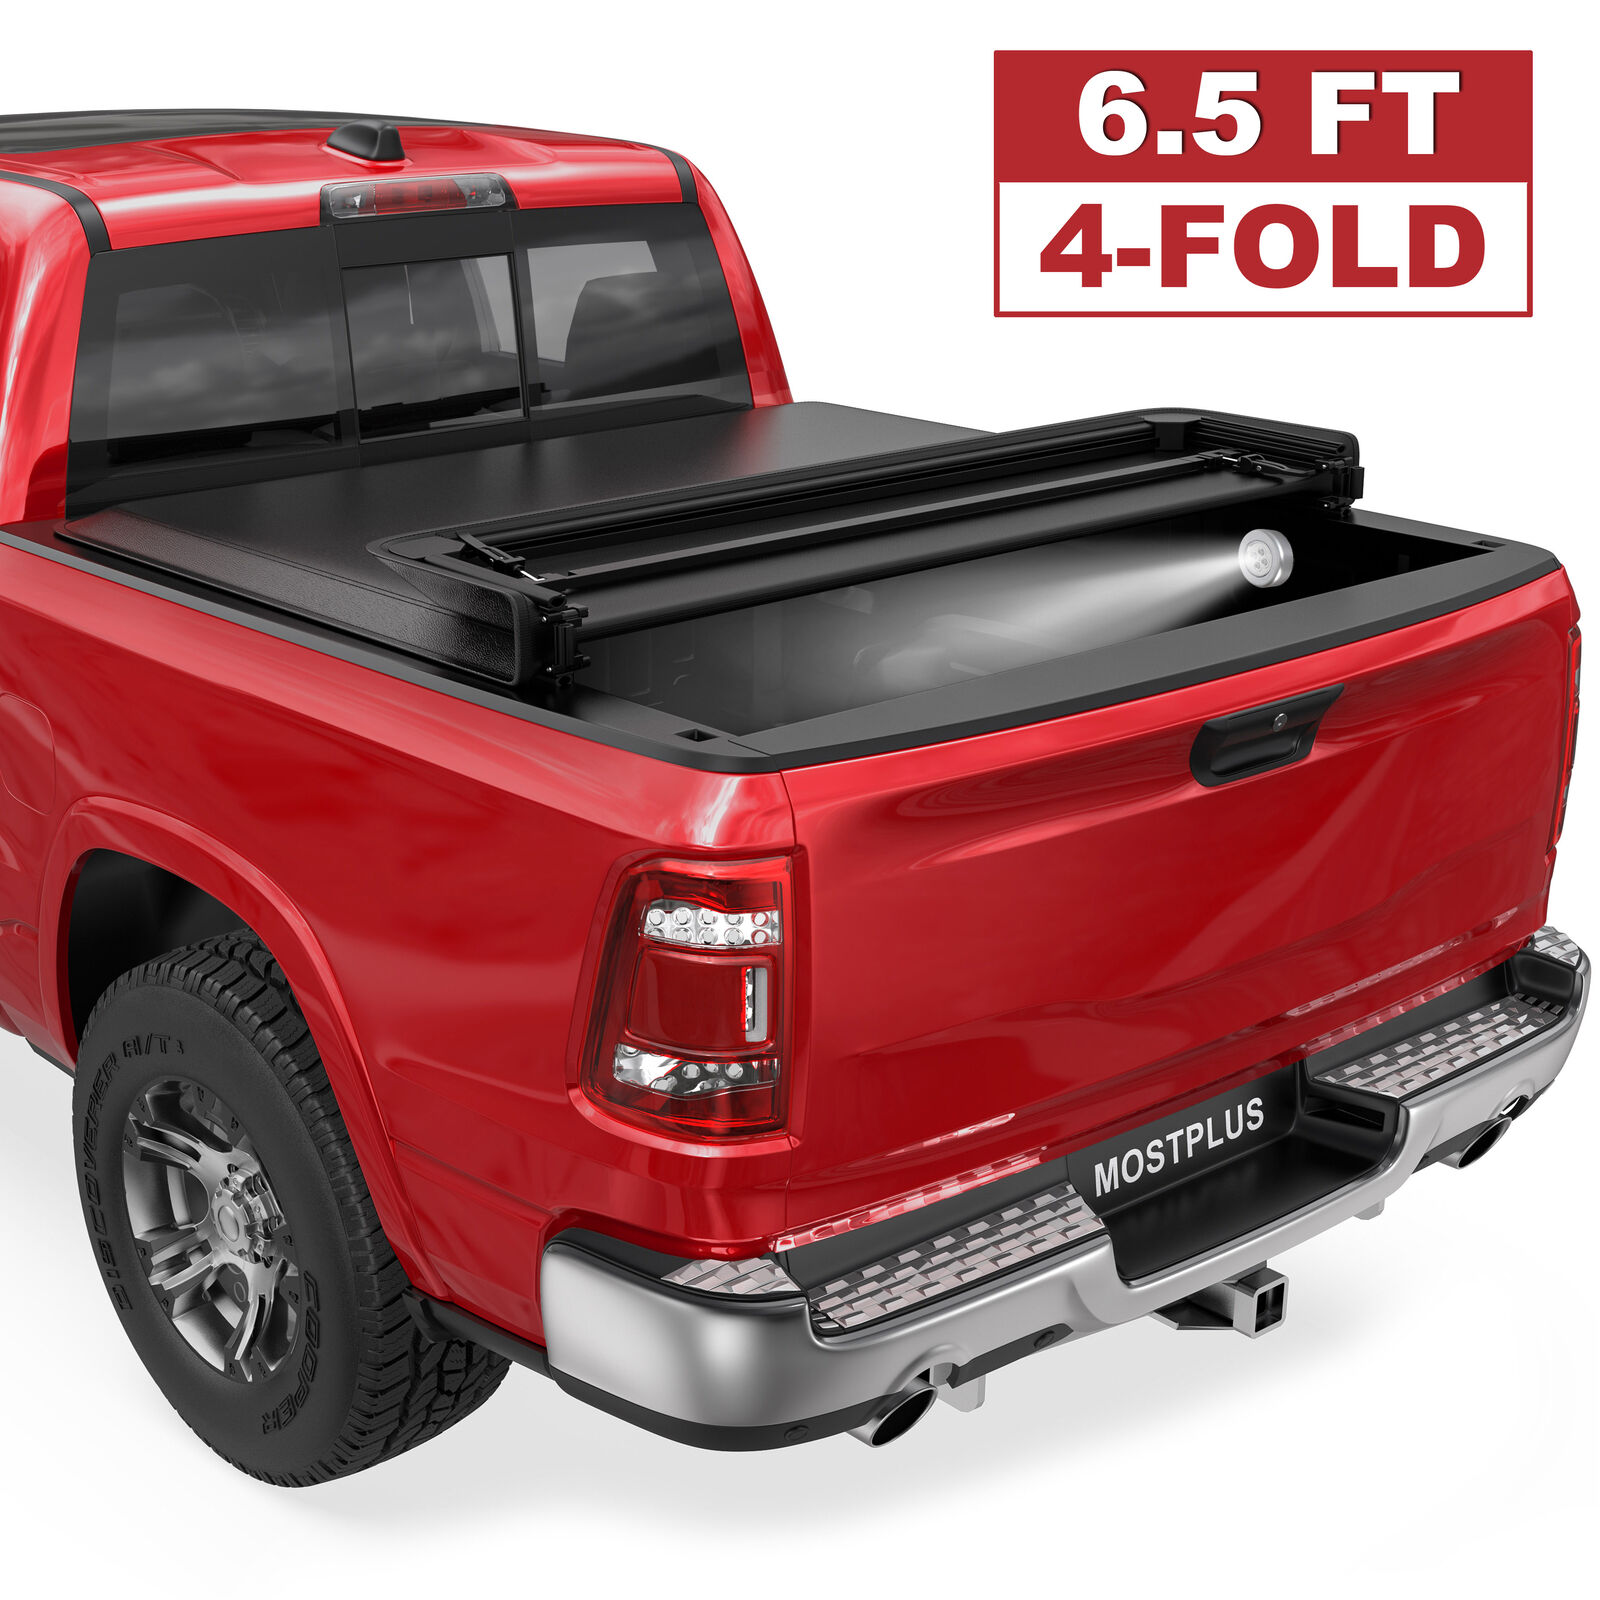 6.4FT/6.5FT 4 Fold Soft Bed Tonneau Cover For 02-23 Ram 1500 03-23 Ram 2500/3500